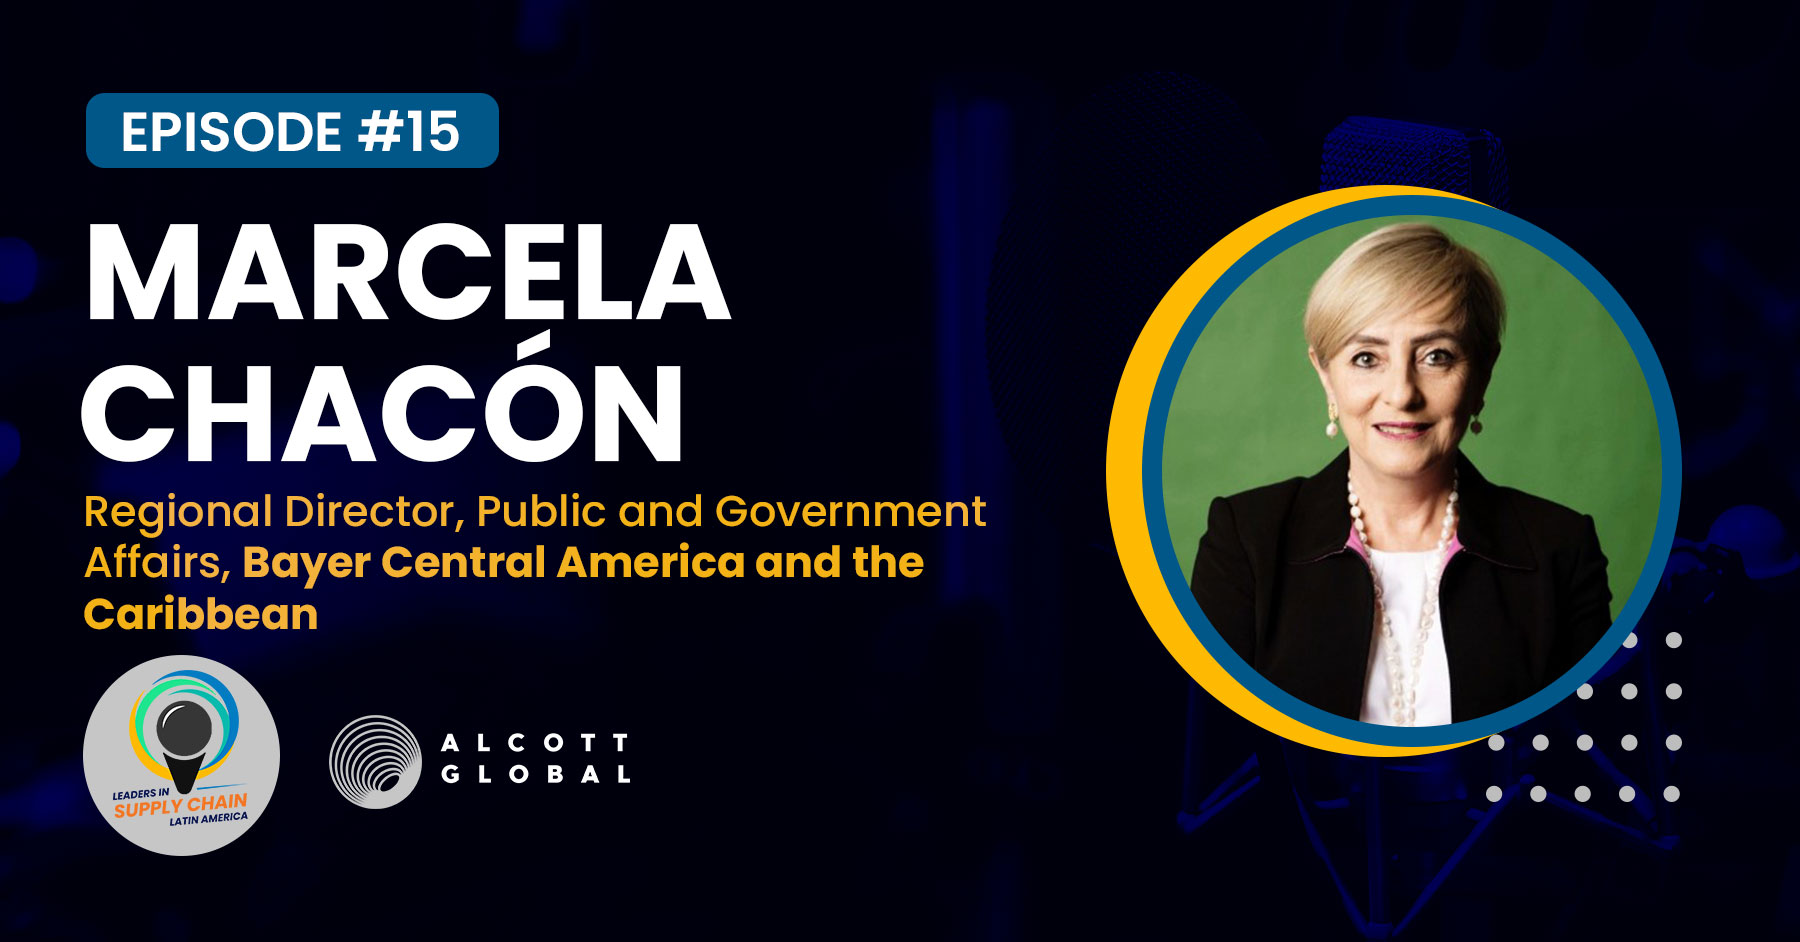 #15: Marcela Chacon, Regional Director, Public and Government Affairs at Bayer Featured Image